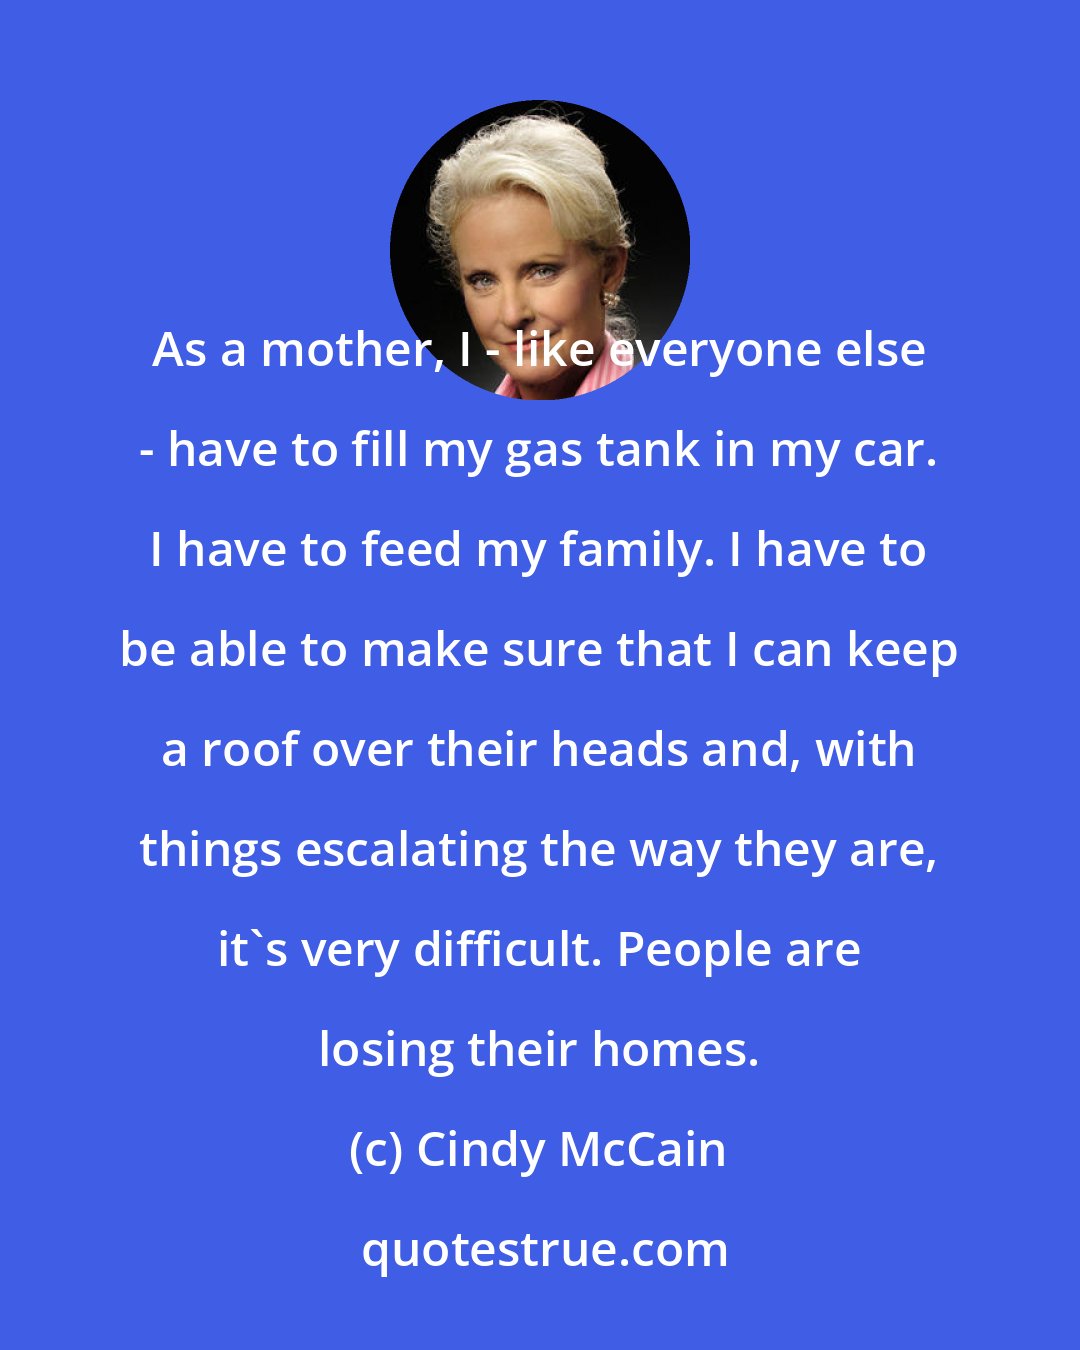 Cindy McCain: As a mother, I - like everyone else - have to fill my gas tank in my car. I have to feed my family. I have to be able to make sure that I can keep a roof over their heads and, with things escalating the way they are, it's very difficult. People are losing their homes.